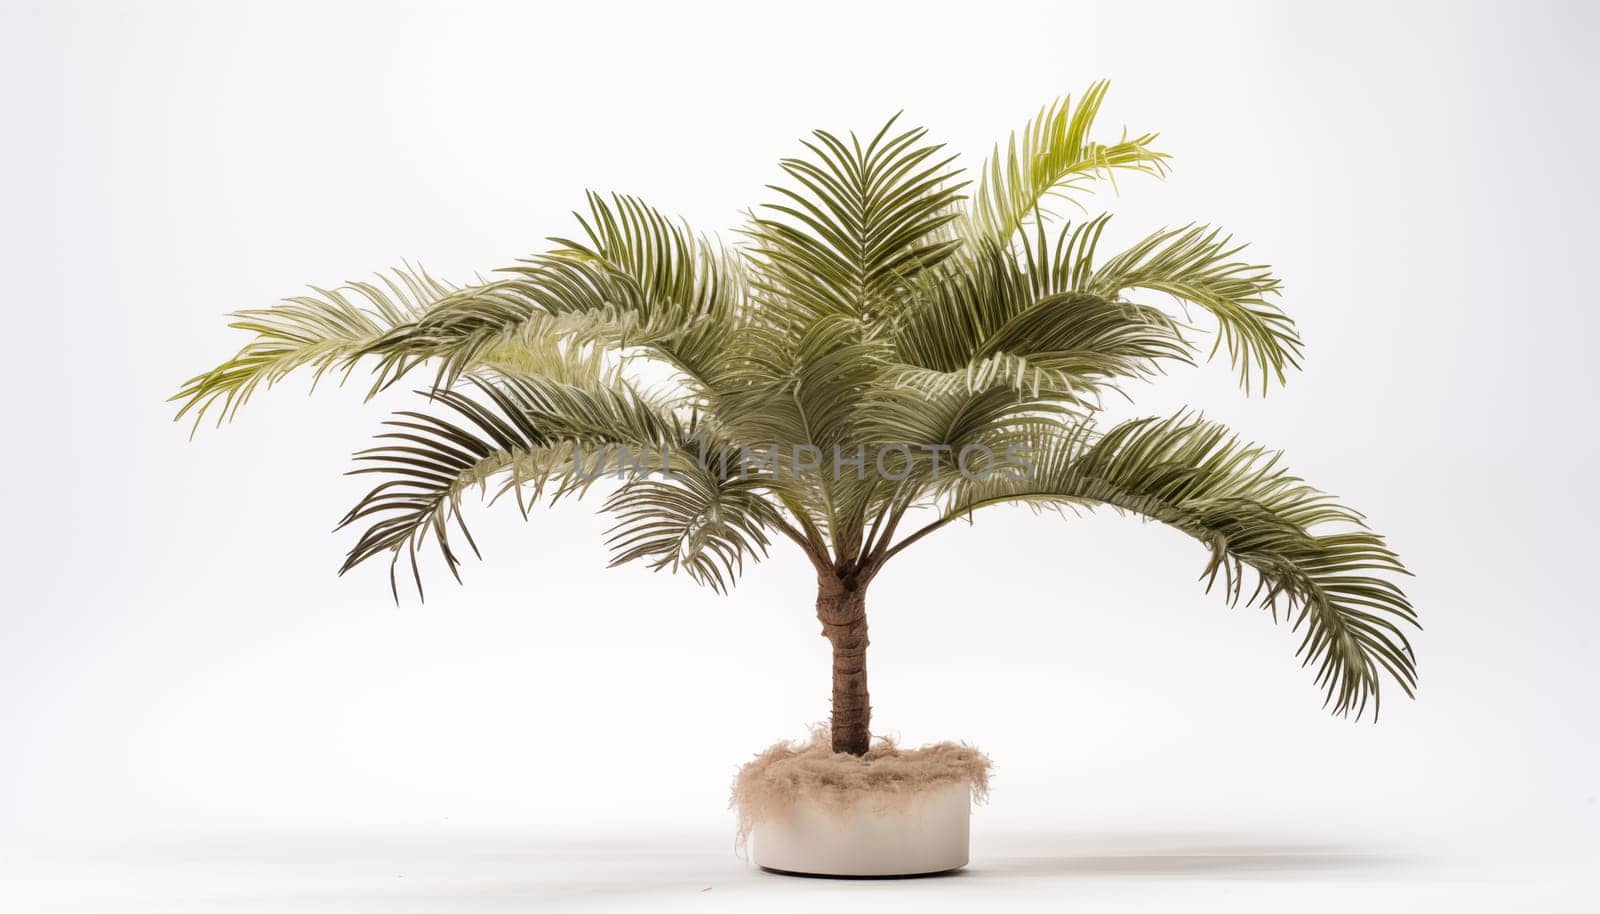 Cycas palm by Nadtochiy